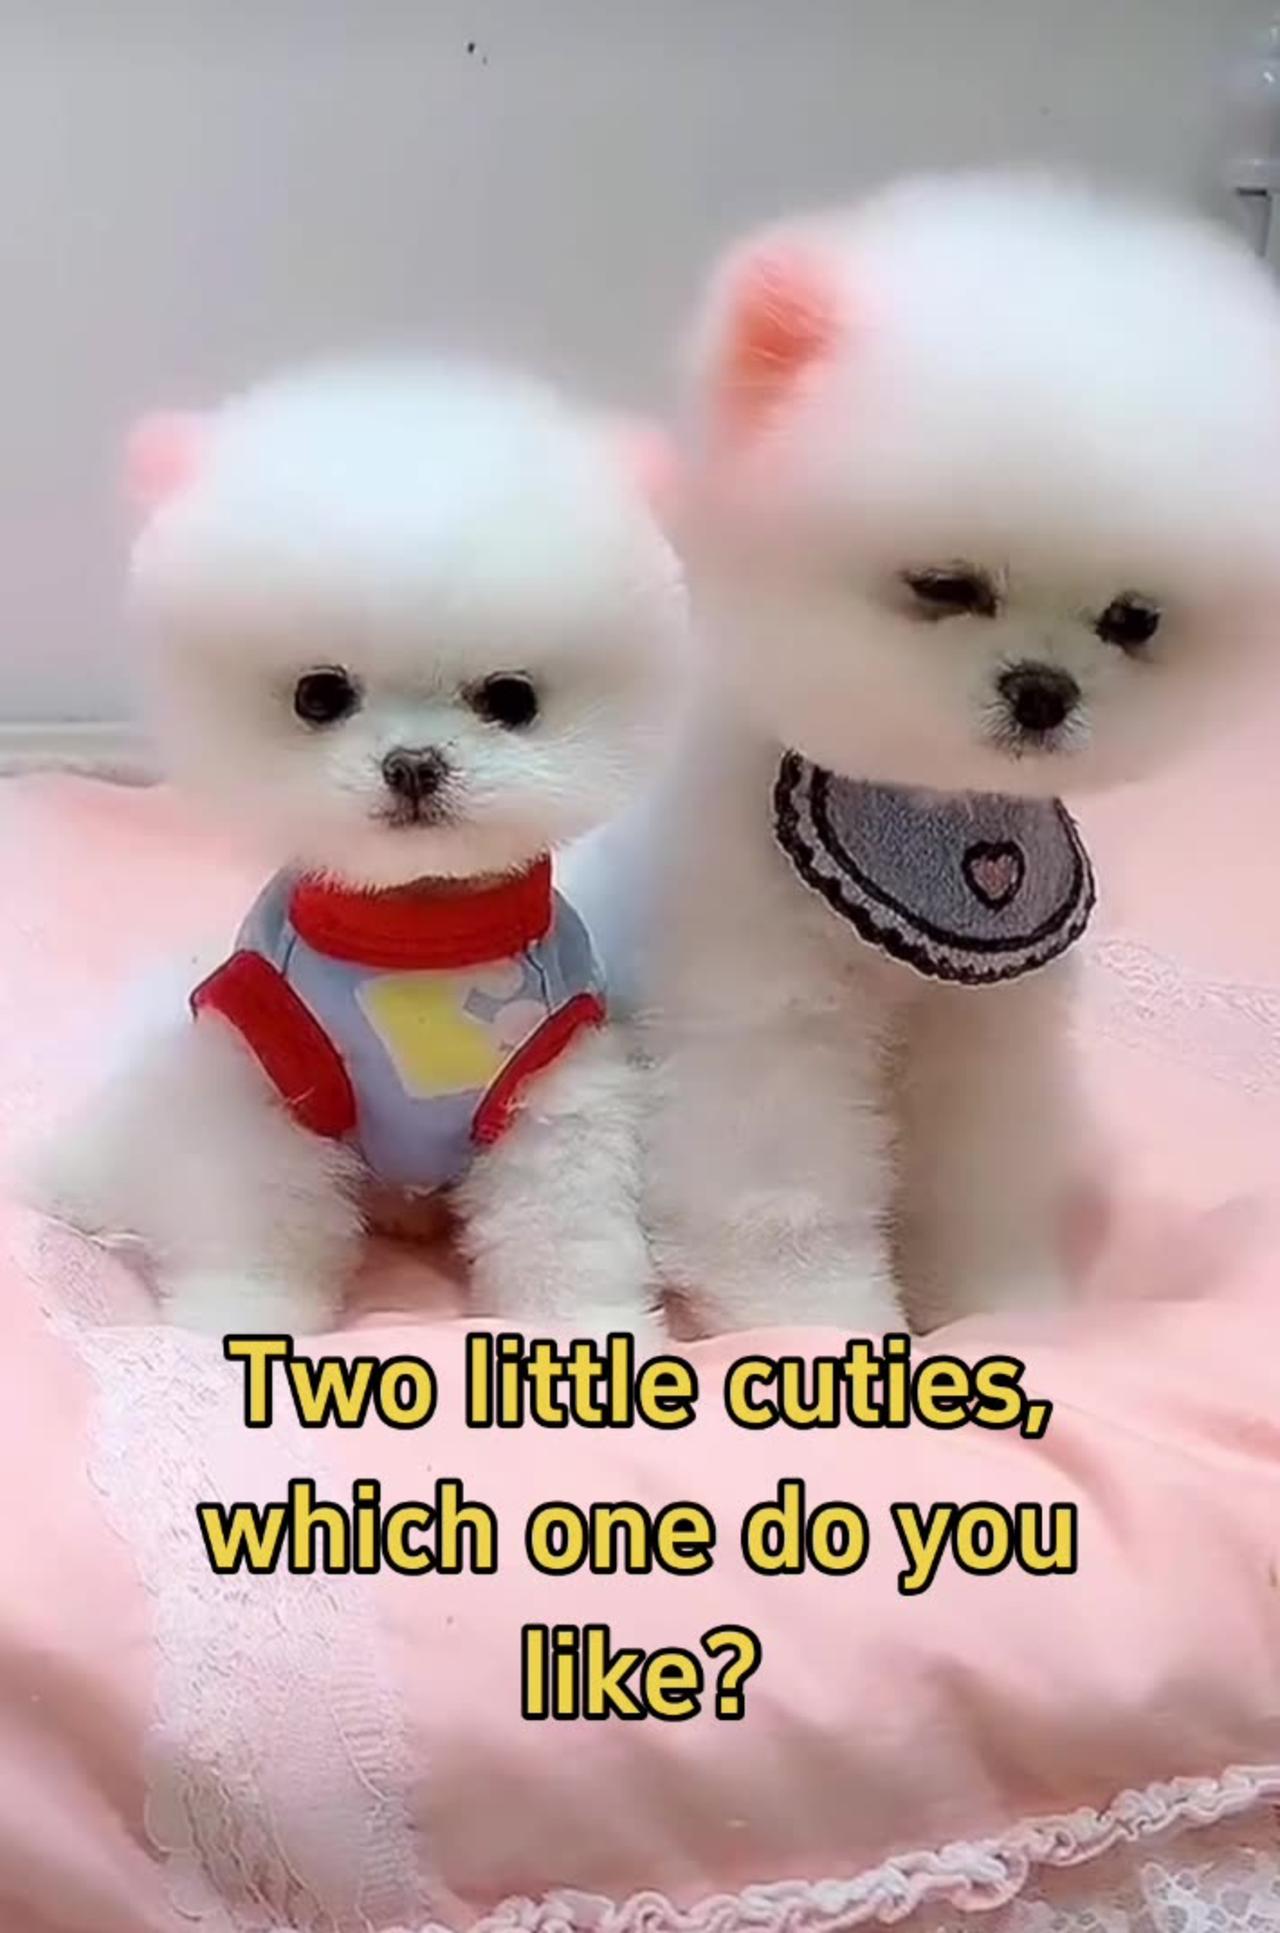 Two little cuties, which one do you like?